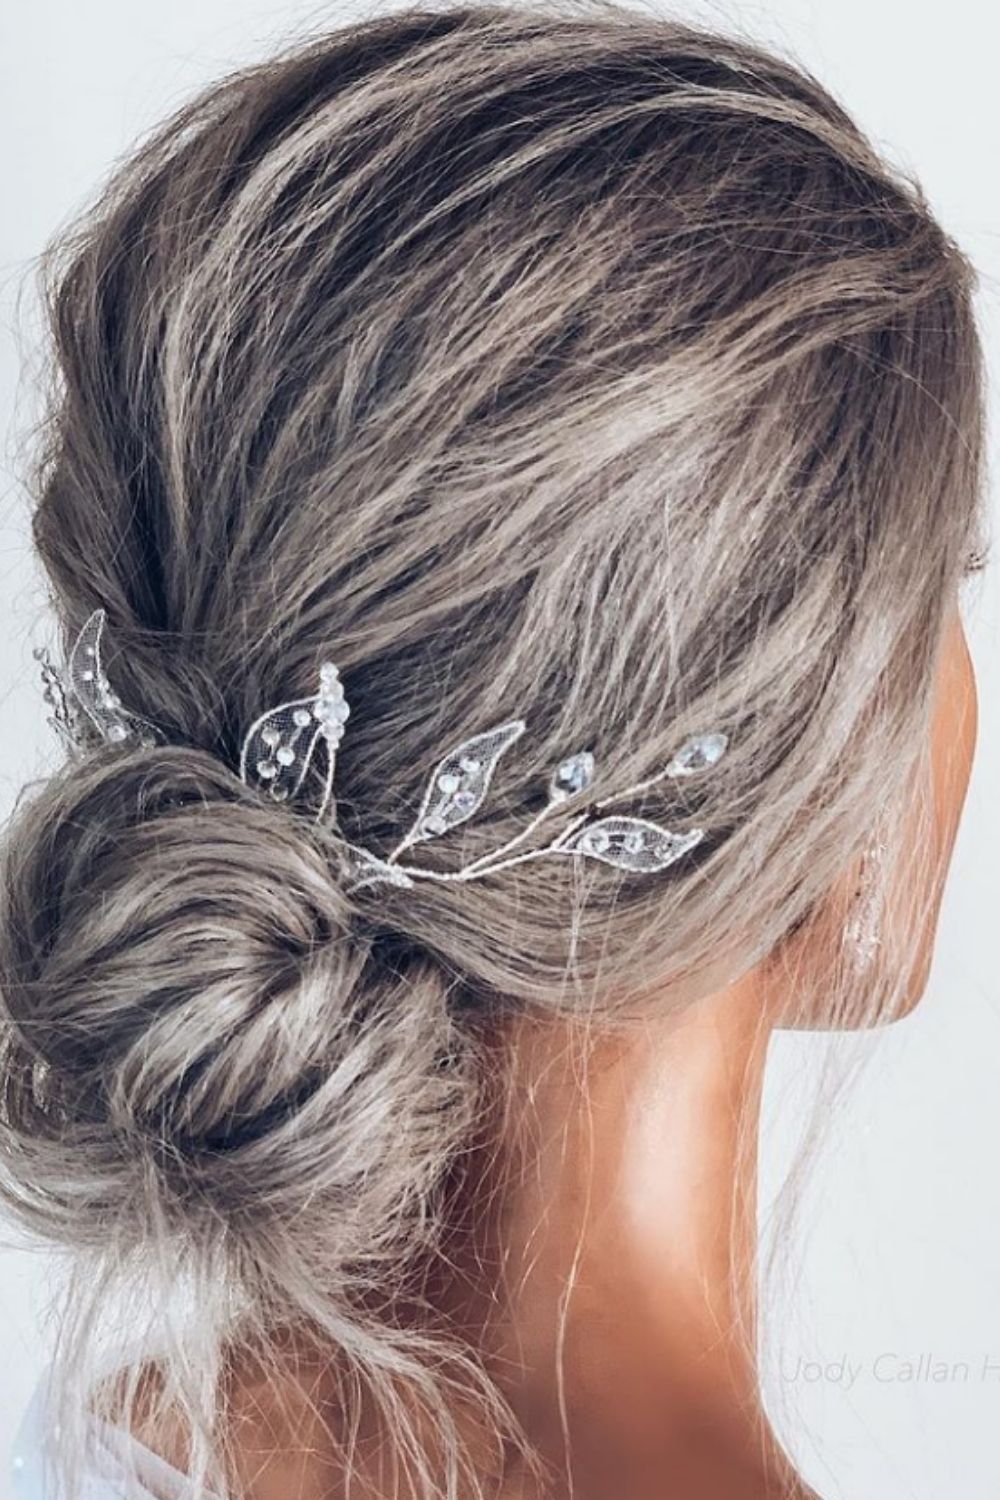 Elegant and charming wedding hairstyle for bride